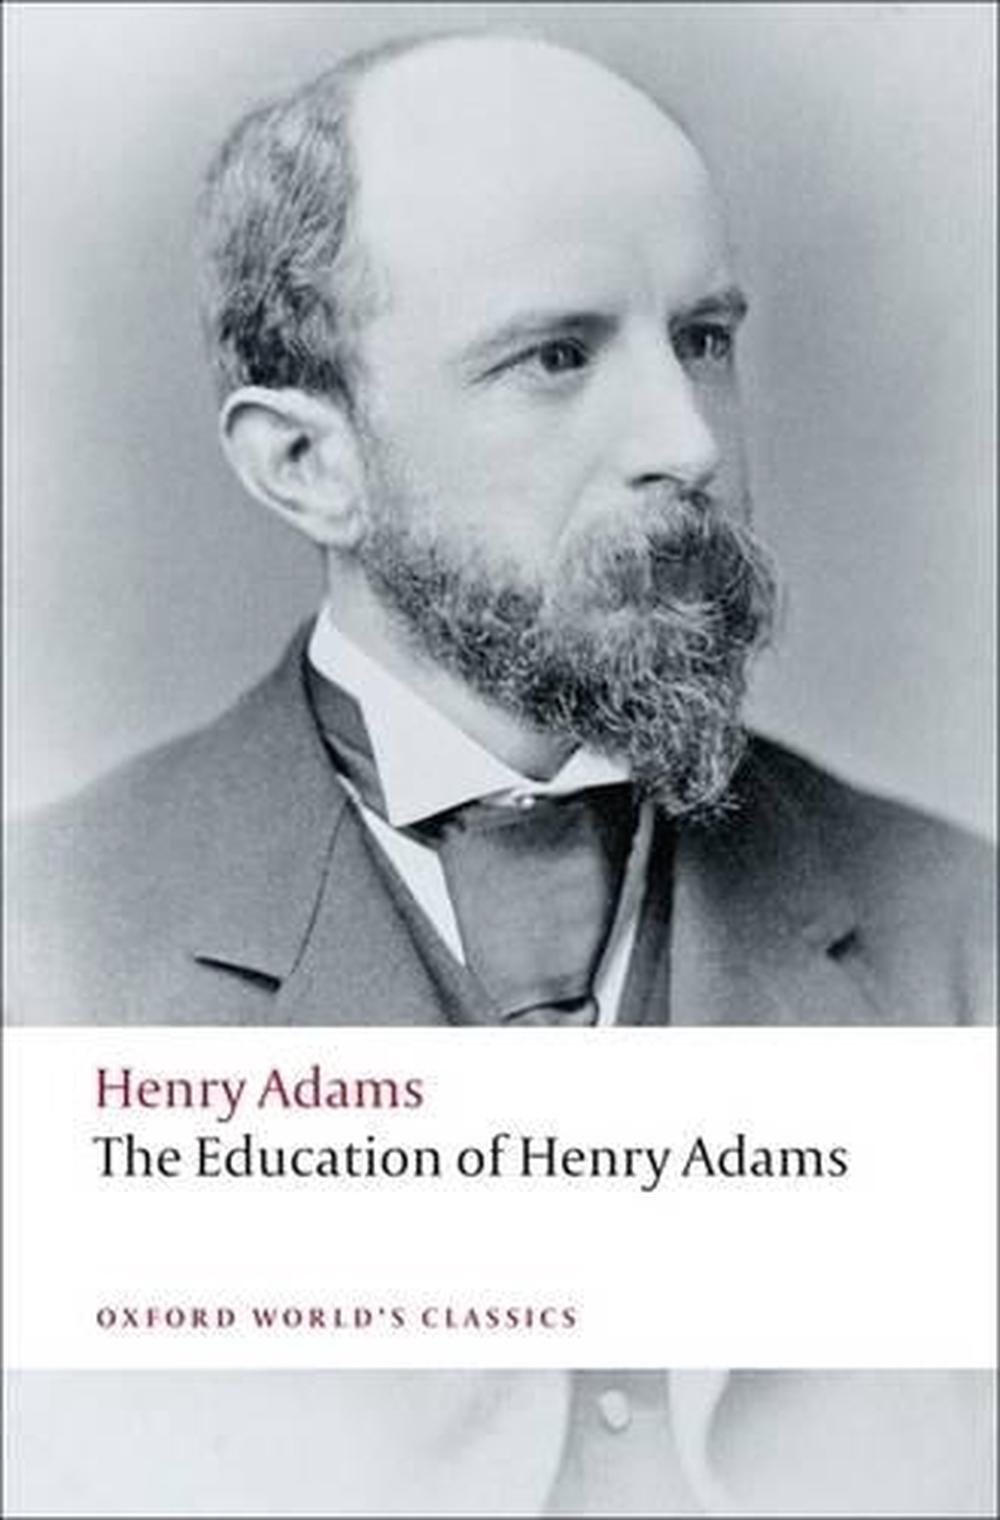 the education of henry adams by henry adams